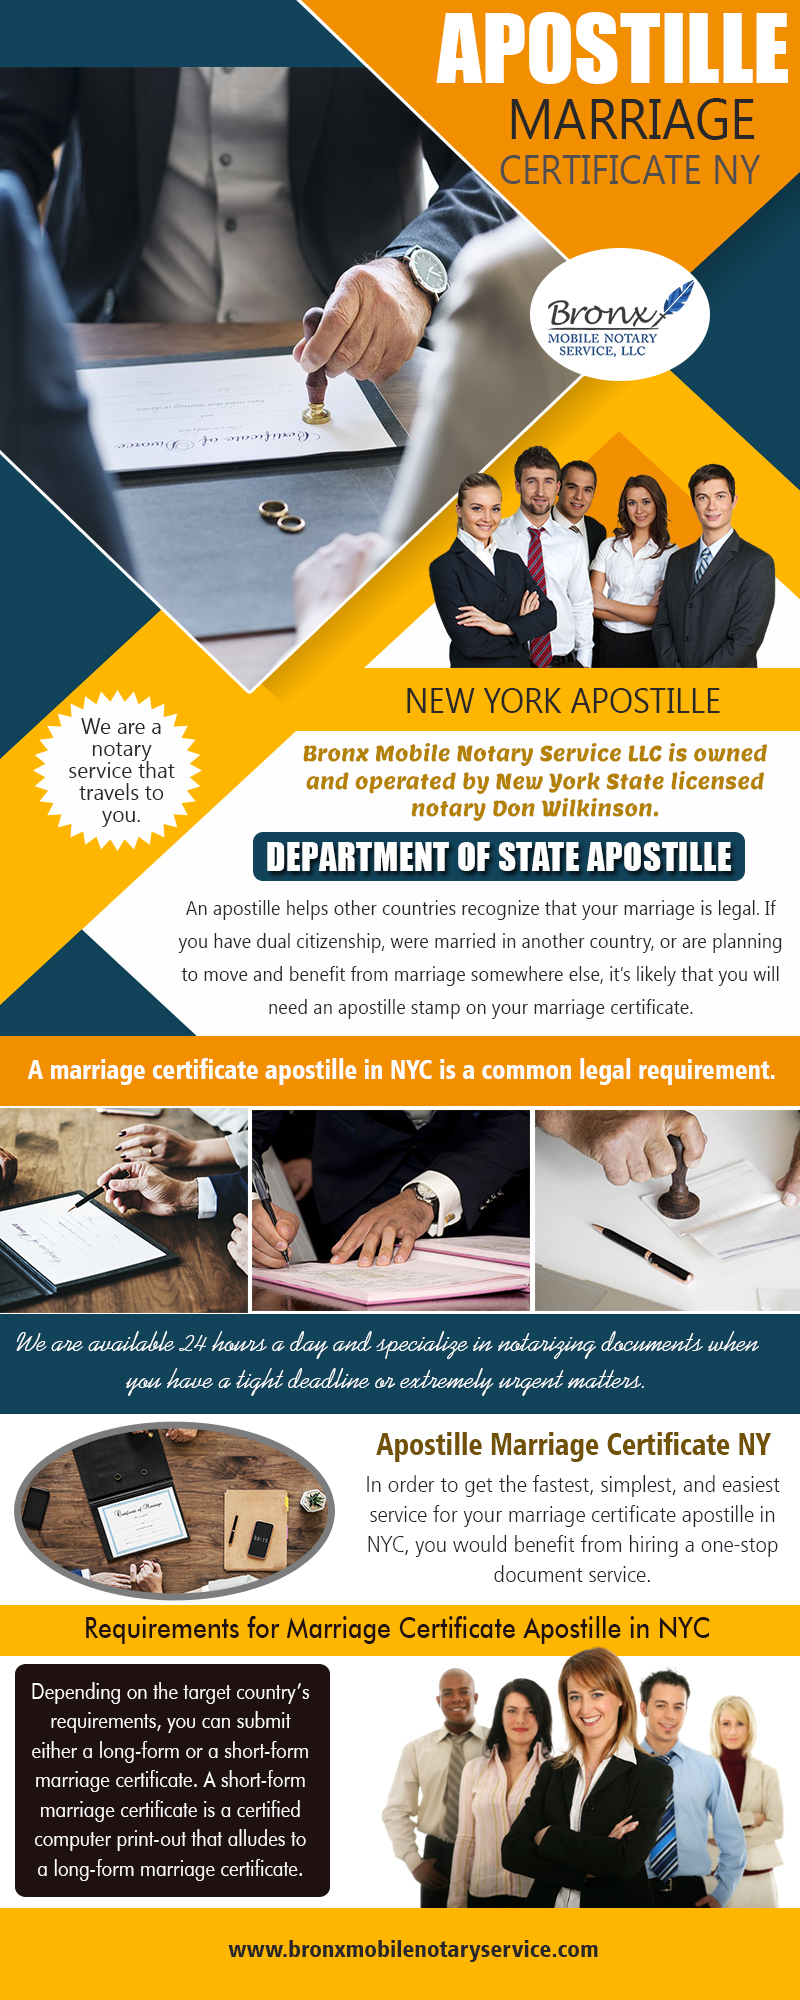 Bronx Mobile Notary Services